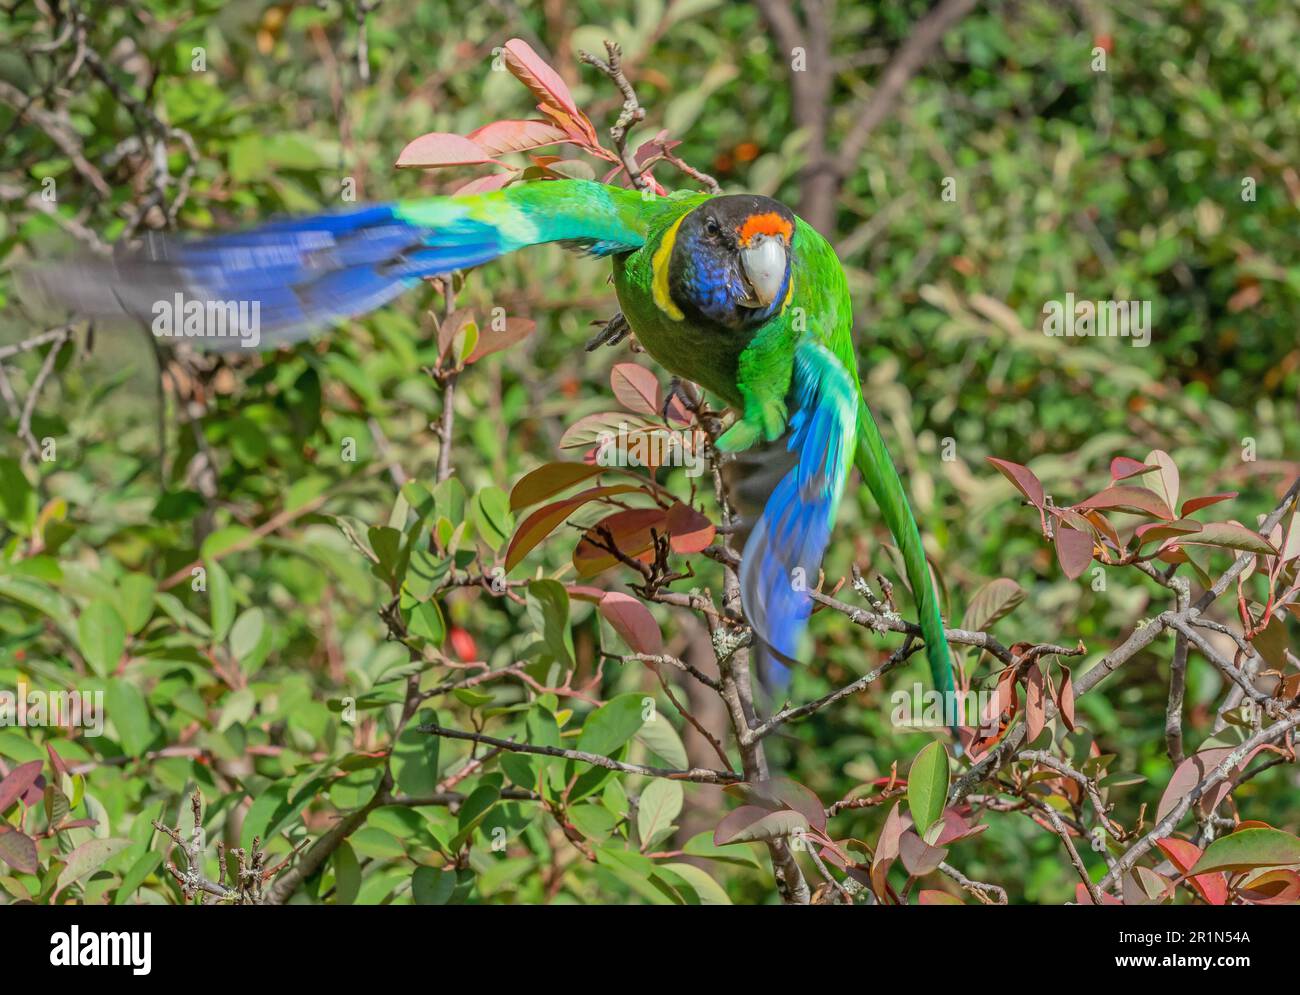 An Australian Ringneck Parrot of the western race, also known as the Twenty-eight Parrot, photographed in flight in a forest. Stock Photo